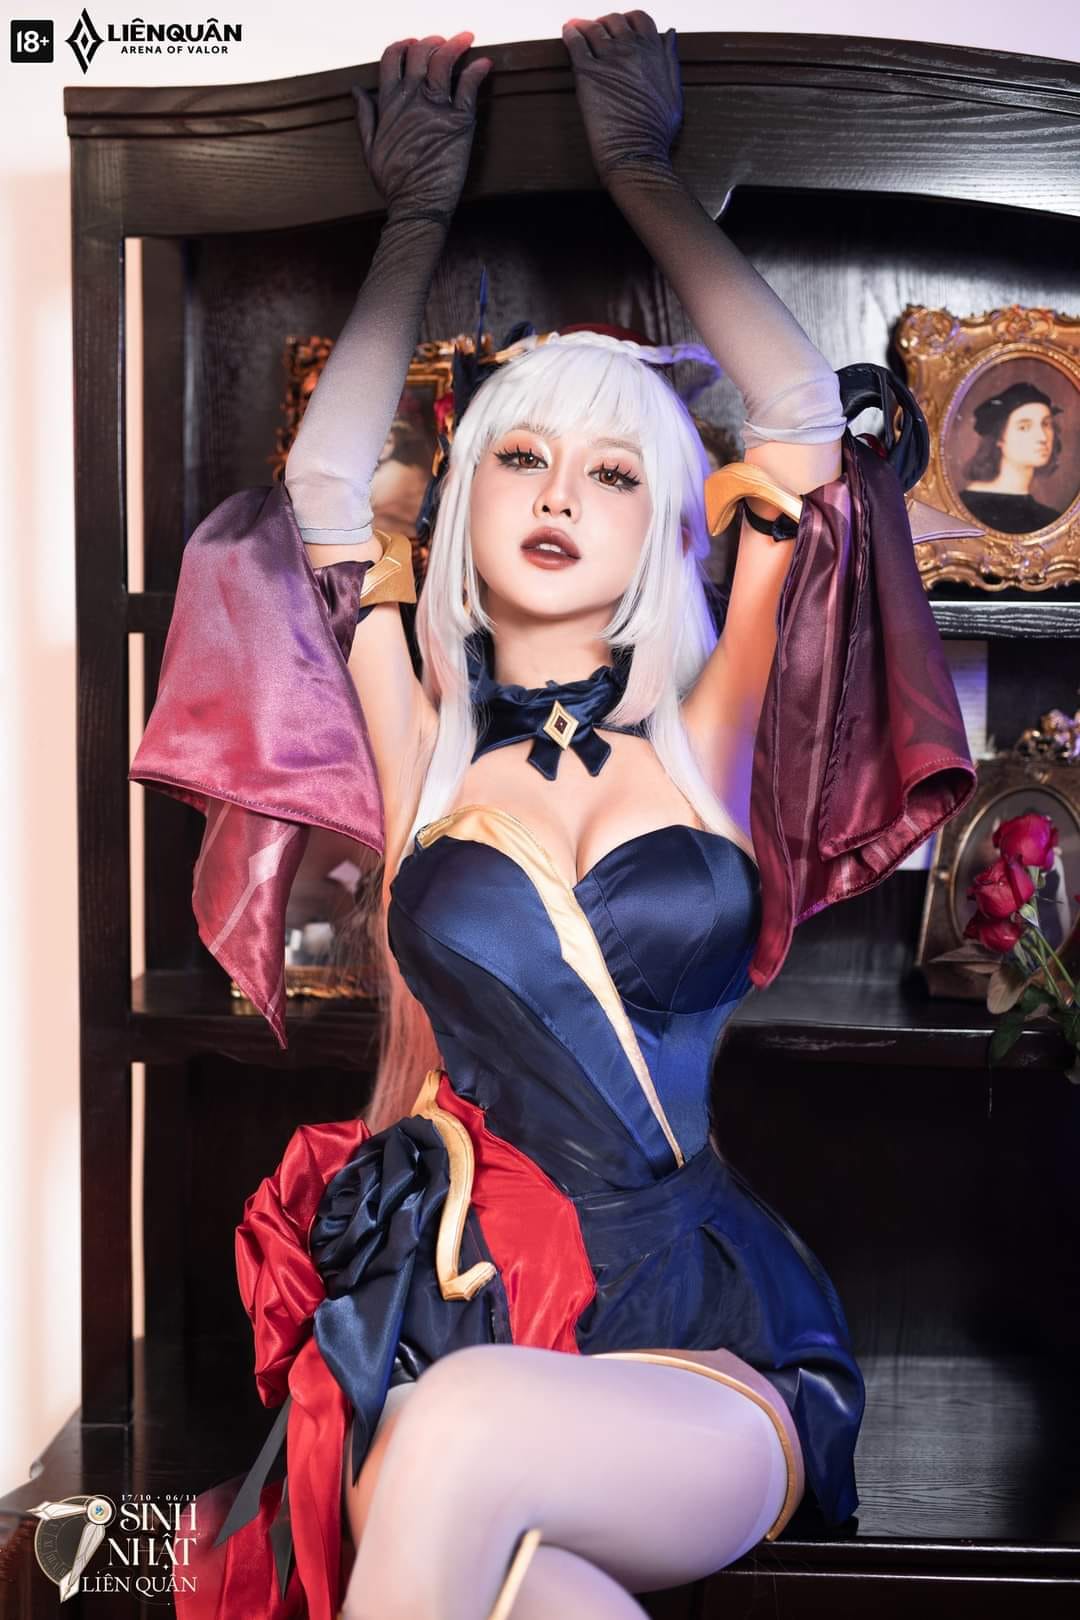 Arena of Valor Cosplay Yue Garden of Awe